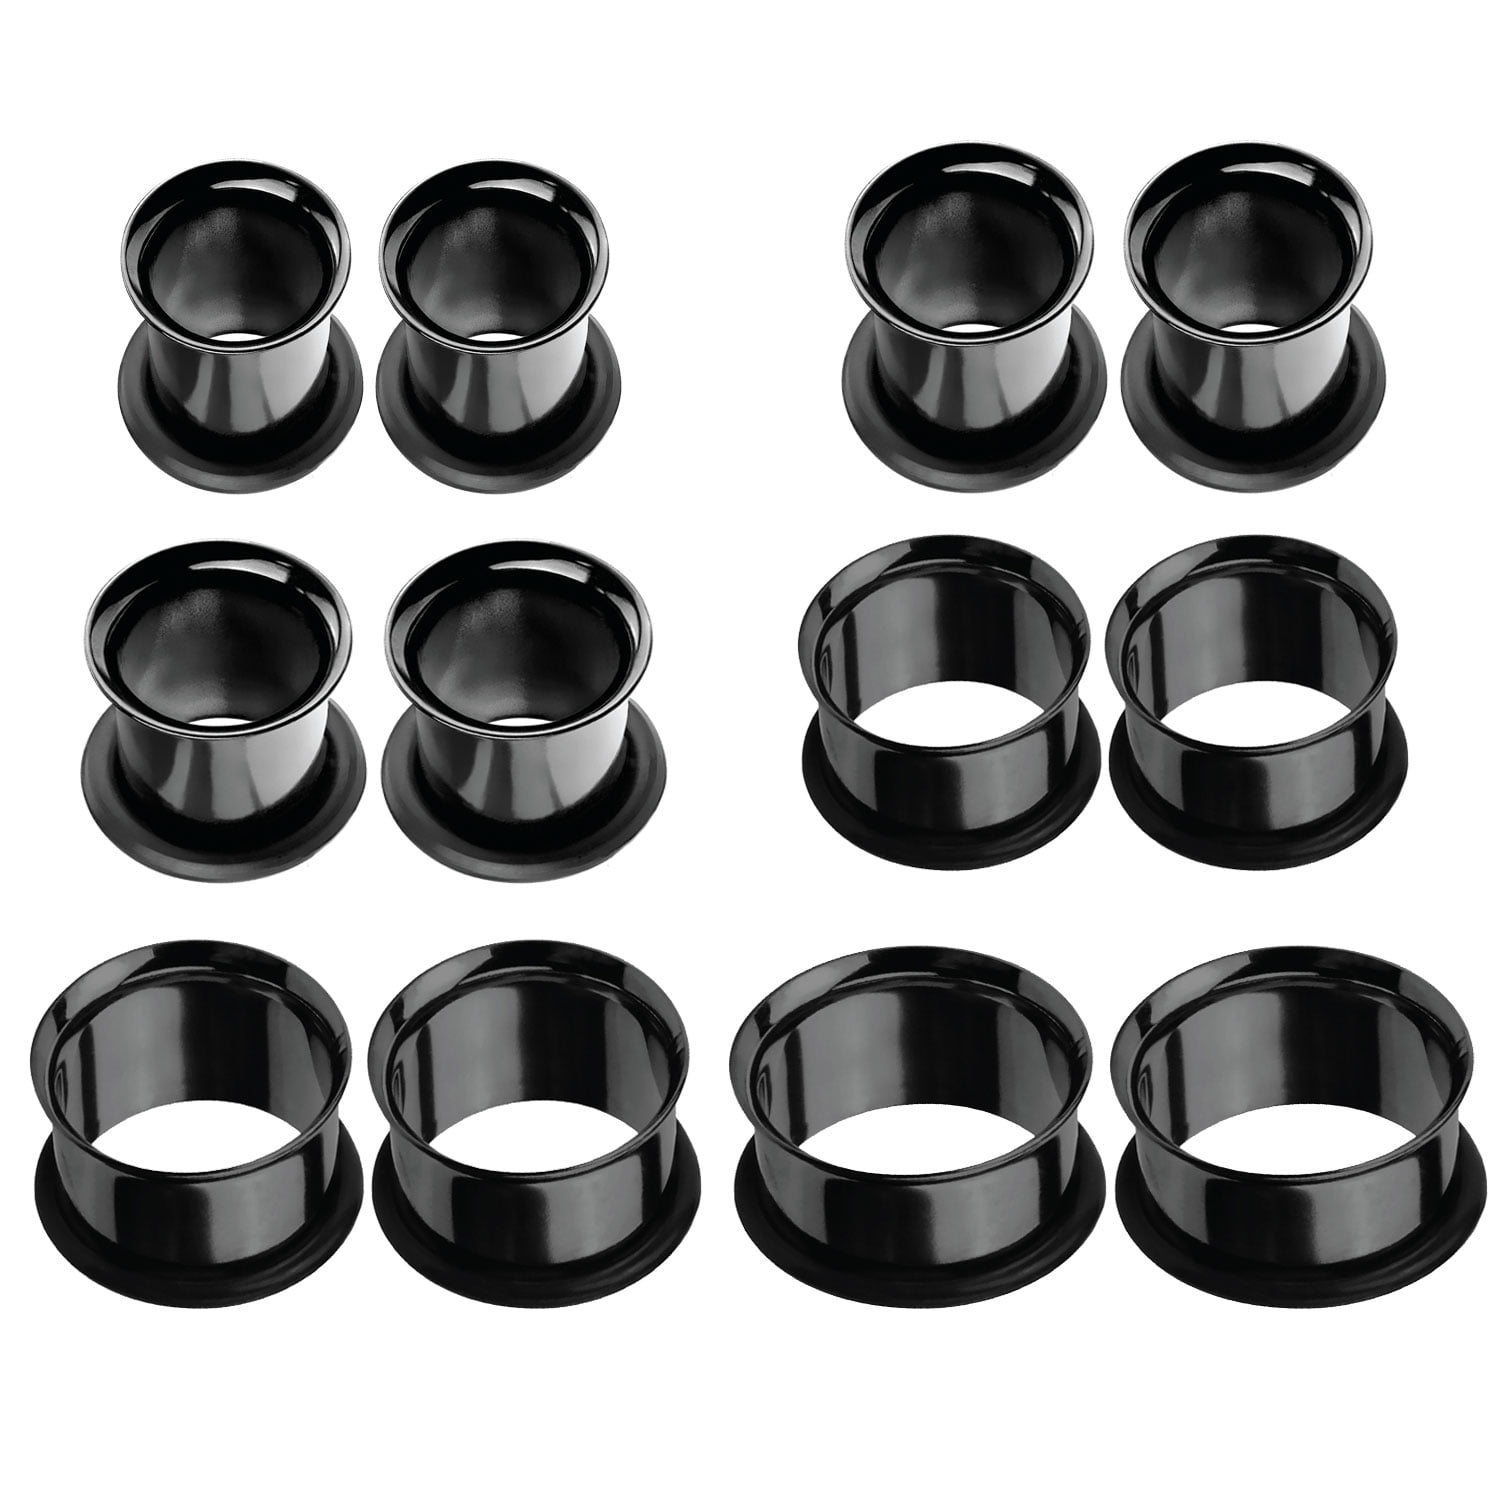 Pair of Ear Plugs Metallic Splatter Black Screw Fit Tunnel 9 Sizes Available 